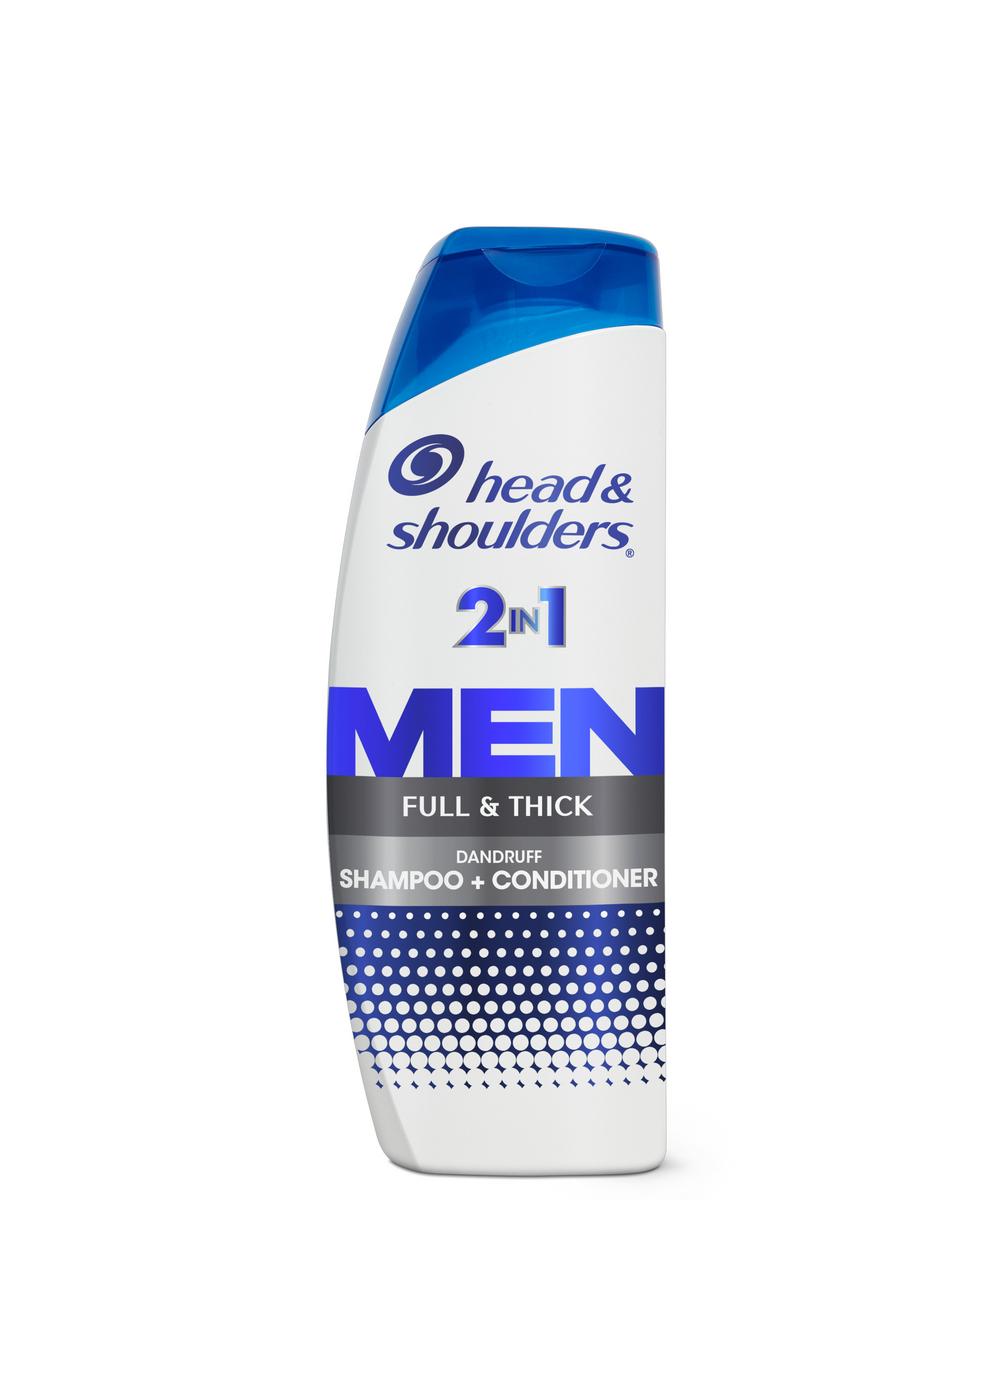 Head & Shoulders 2 in 1 Men Dandruff Shampoo + Conditioner - Full & Thick; image 6 of 11